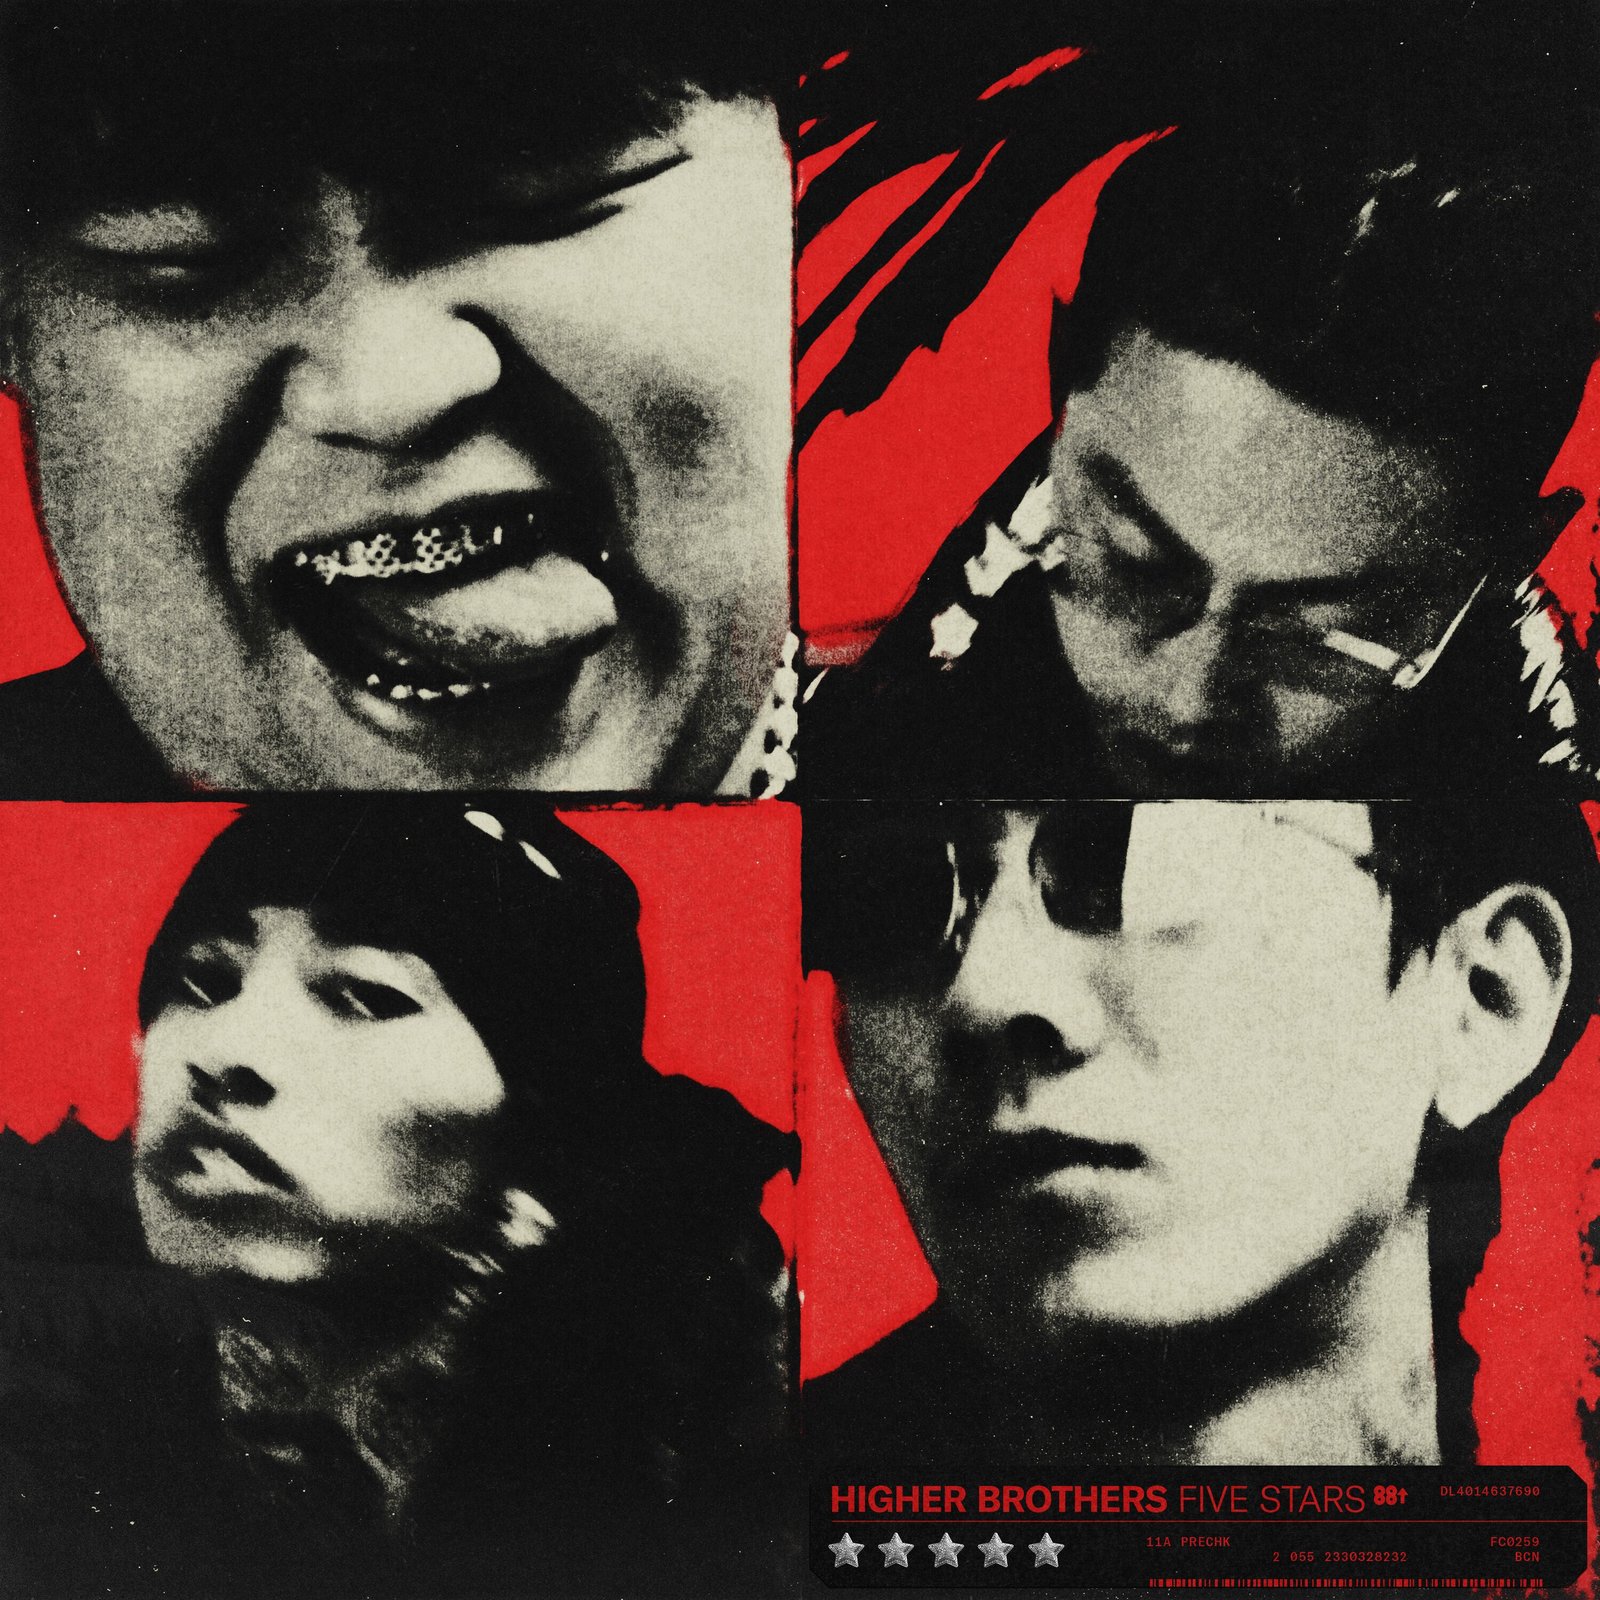 Higher Brothers Five Stars